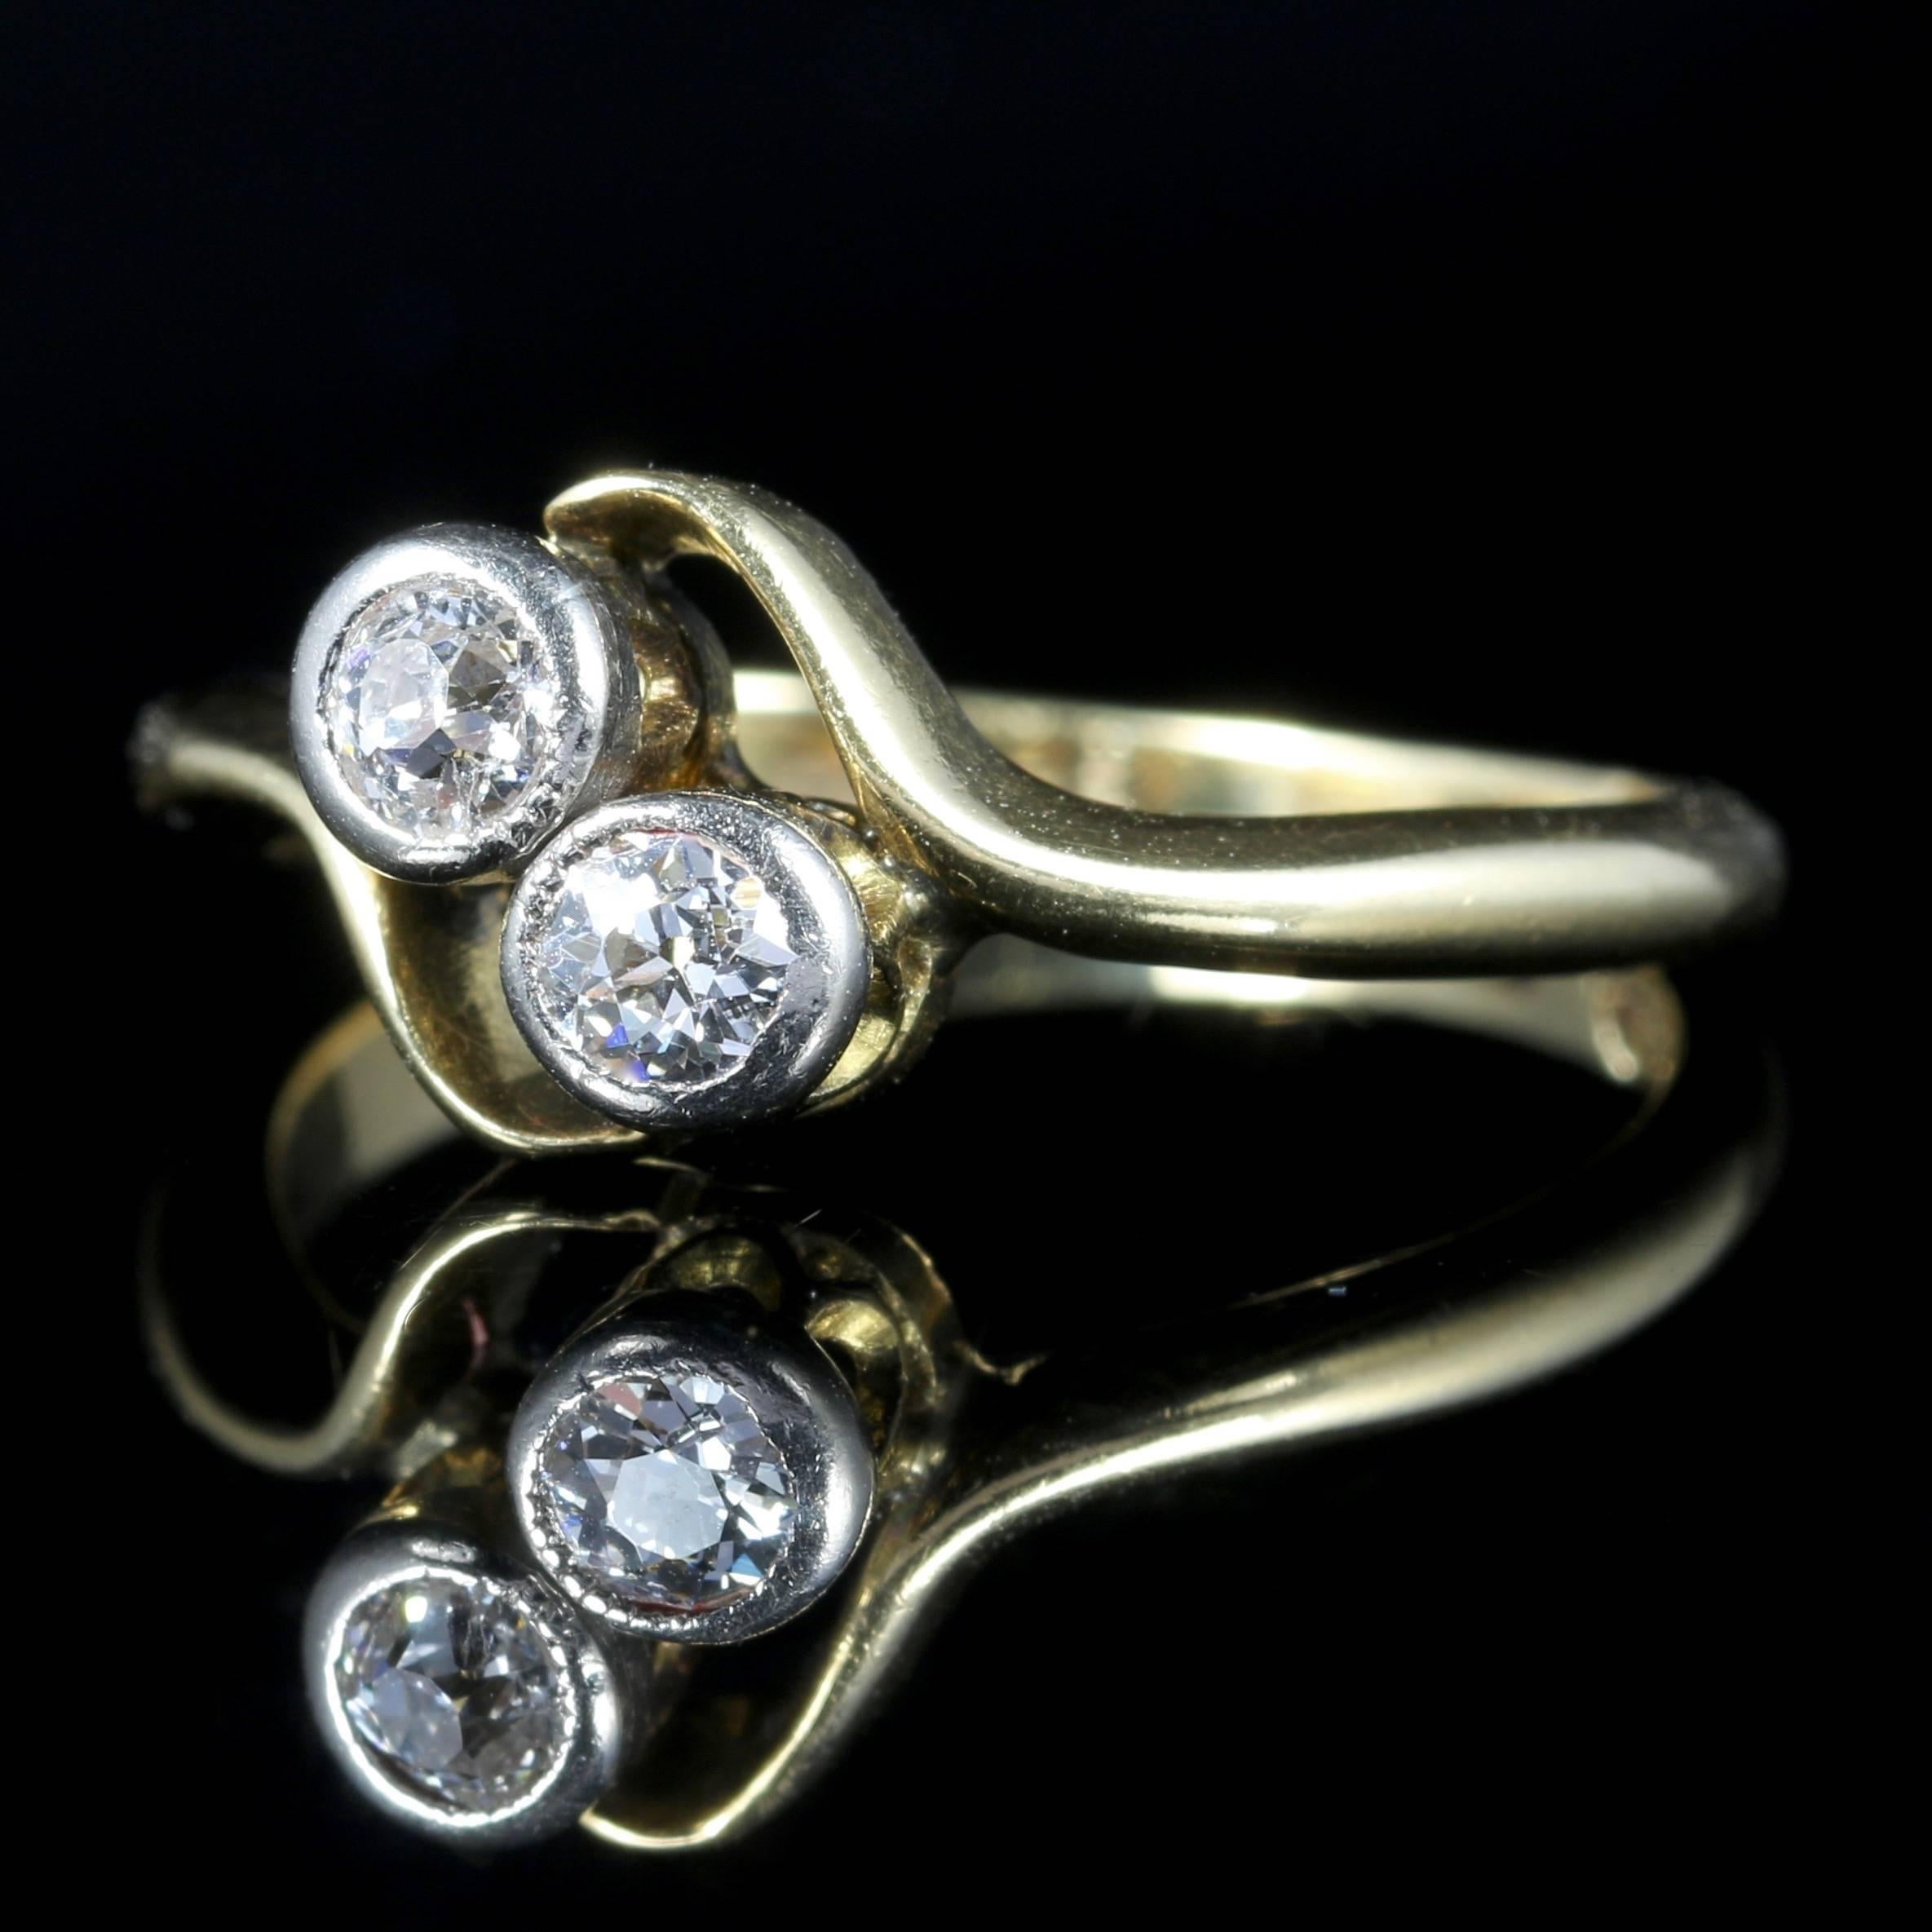 For more details please click continue reading down below...

This fabulous antique Edwardian Diamond twist ring is Circa 1915, set in 18ct Yellow Gold.

Two lovely old cut rub over set Diamonds sit centrally on this antique ring in a little